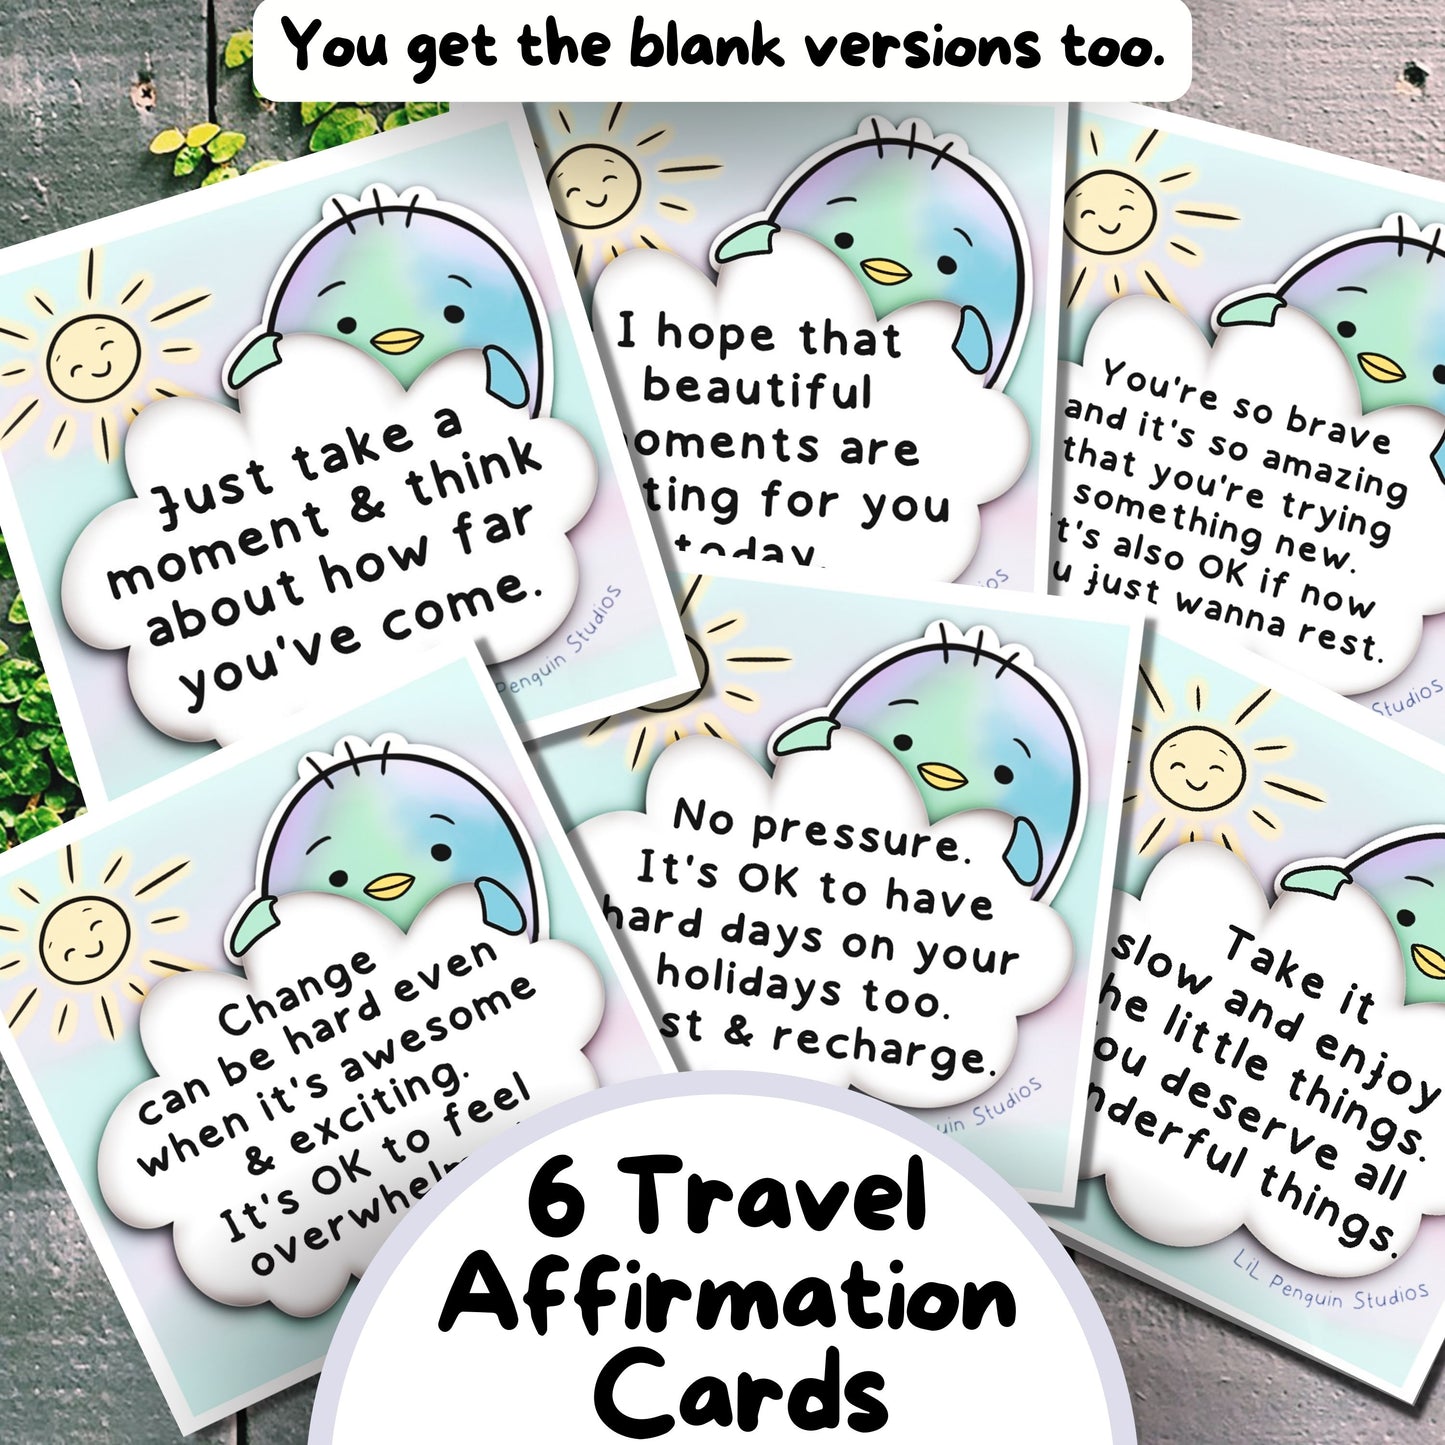 Travel affirmations to reduce anxiety included in the Autism Travel Kit (communication cards, planner, journal, affirmations and more).